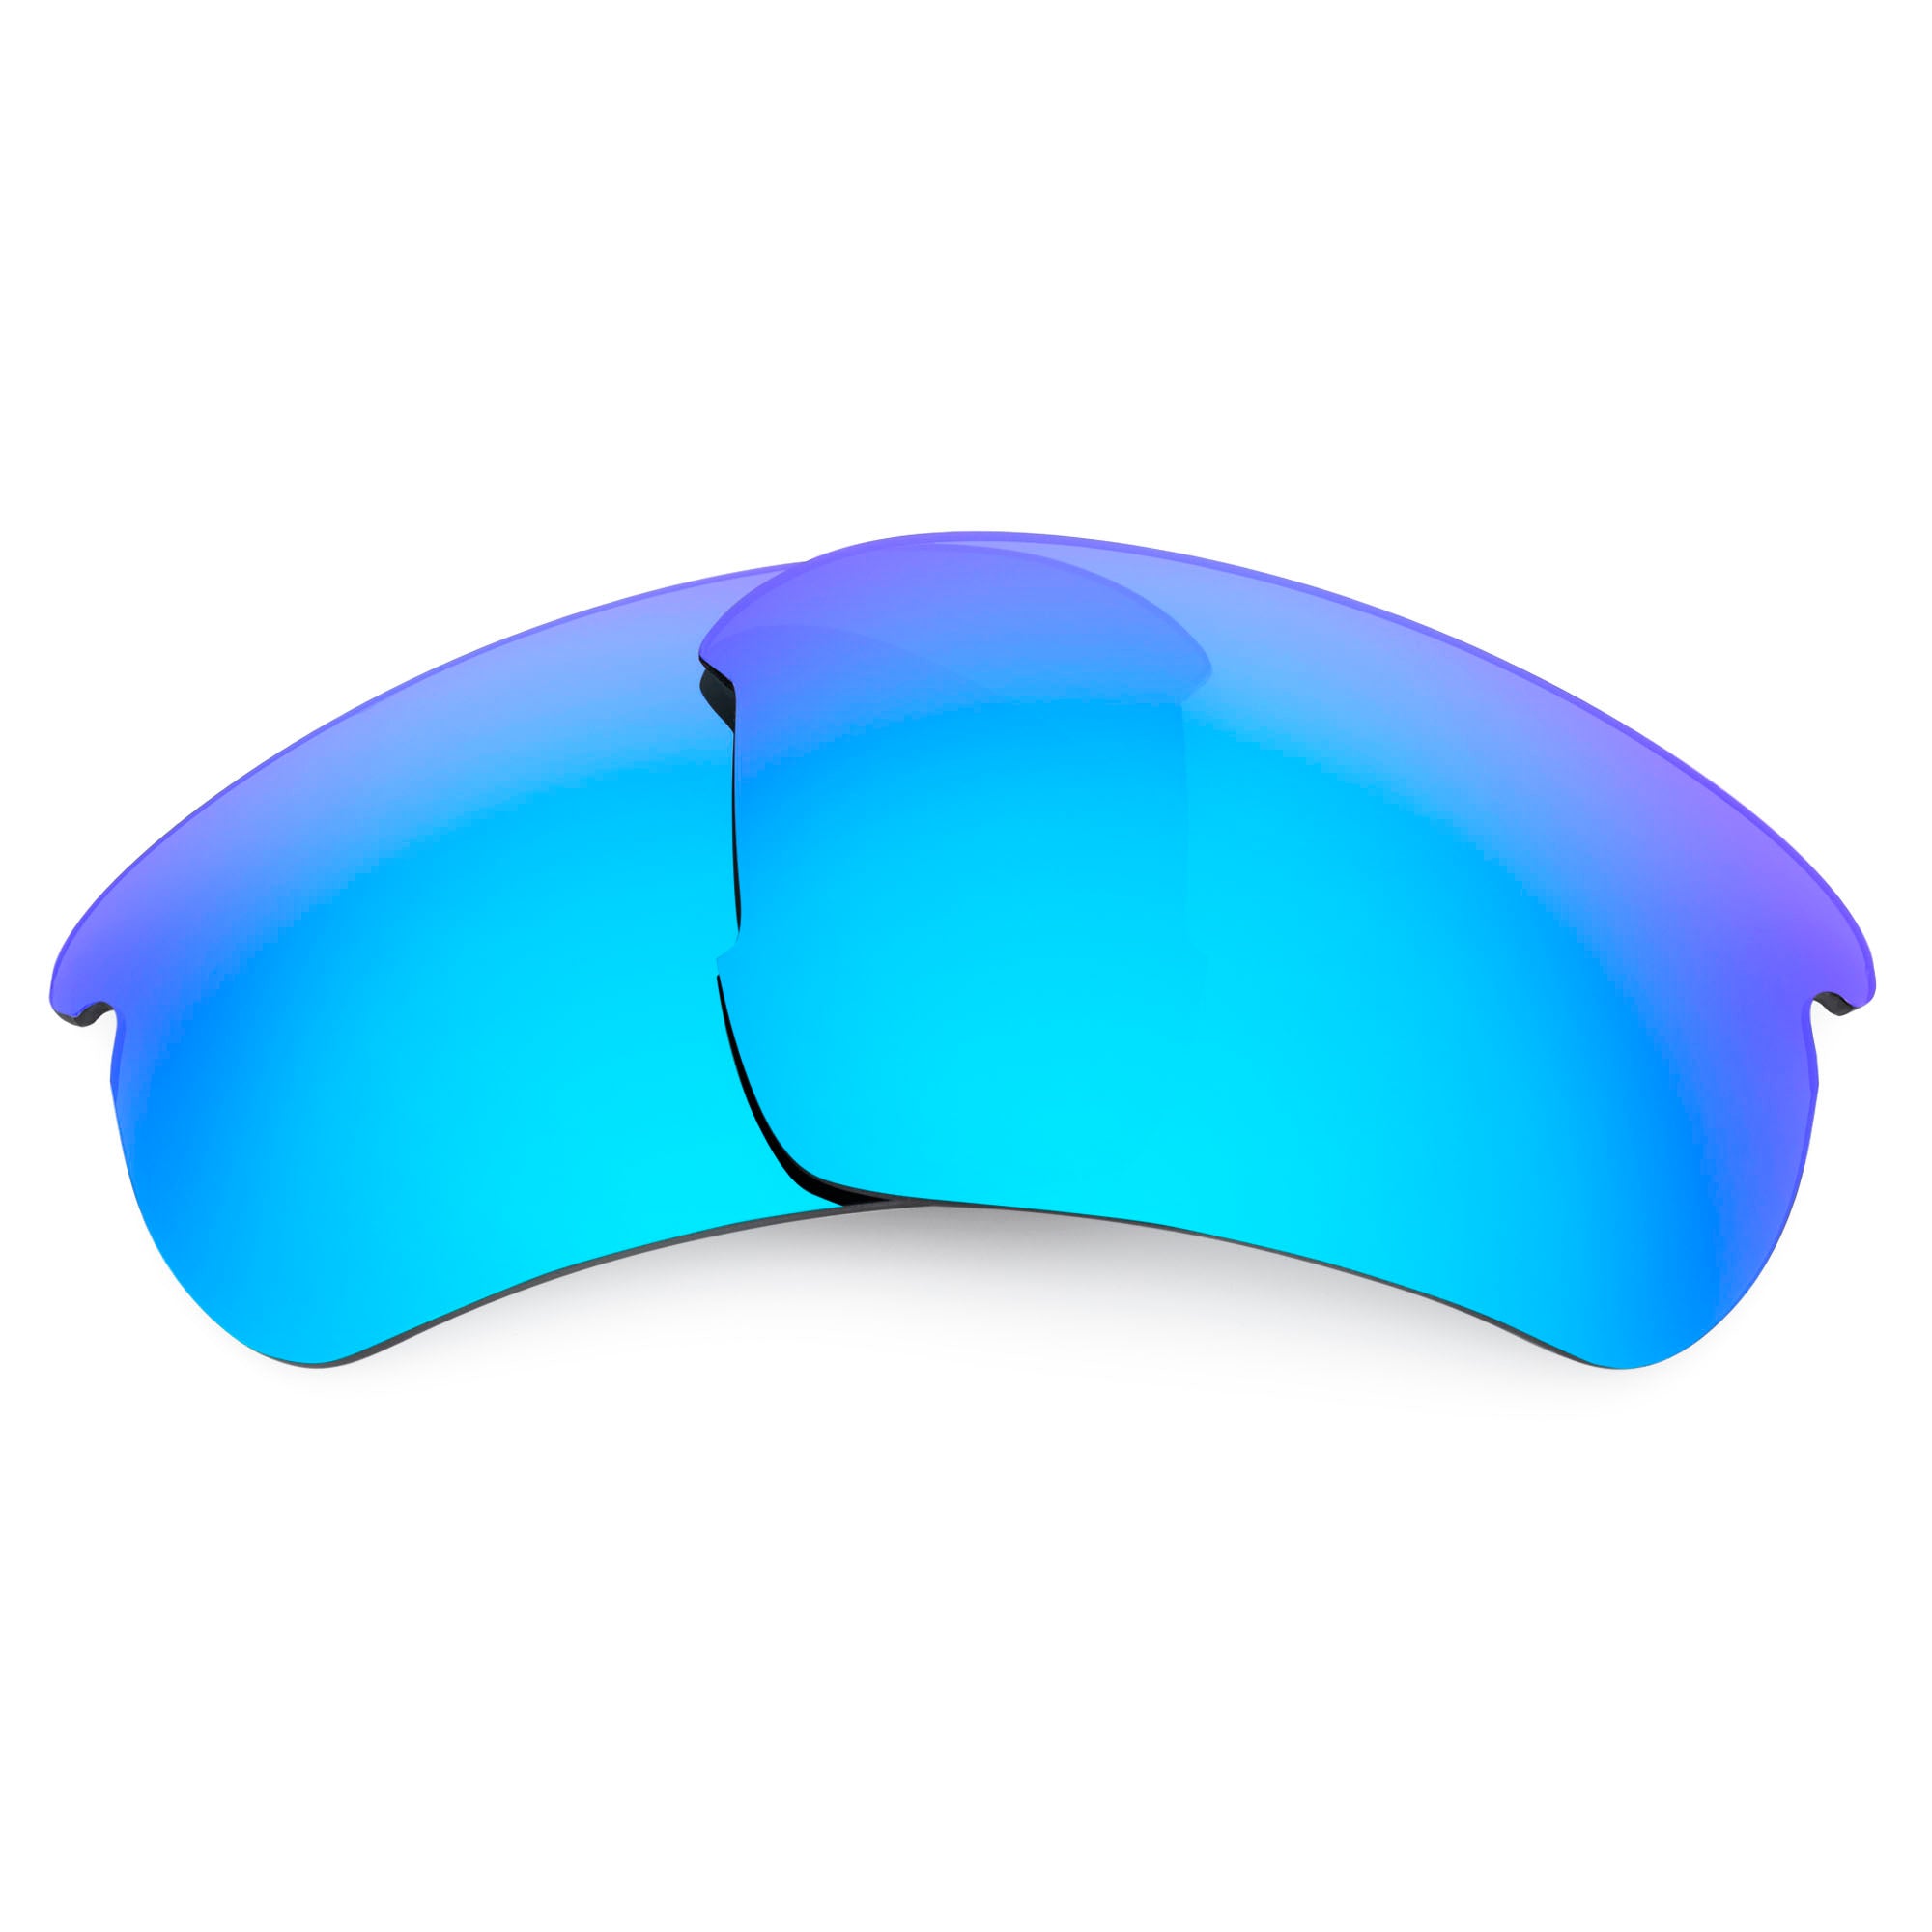 Revant replacement lenses for Oakley Flak Beta (Exclusive Shape) Polarized Ice Blue